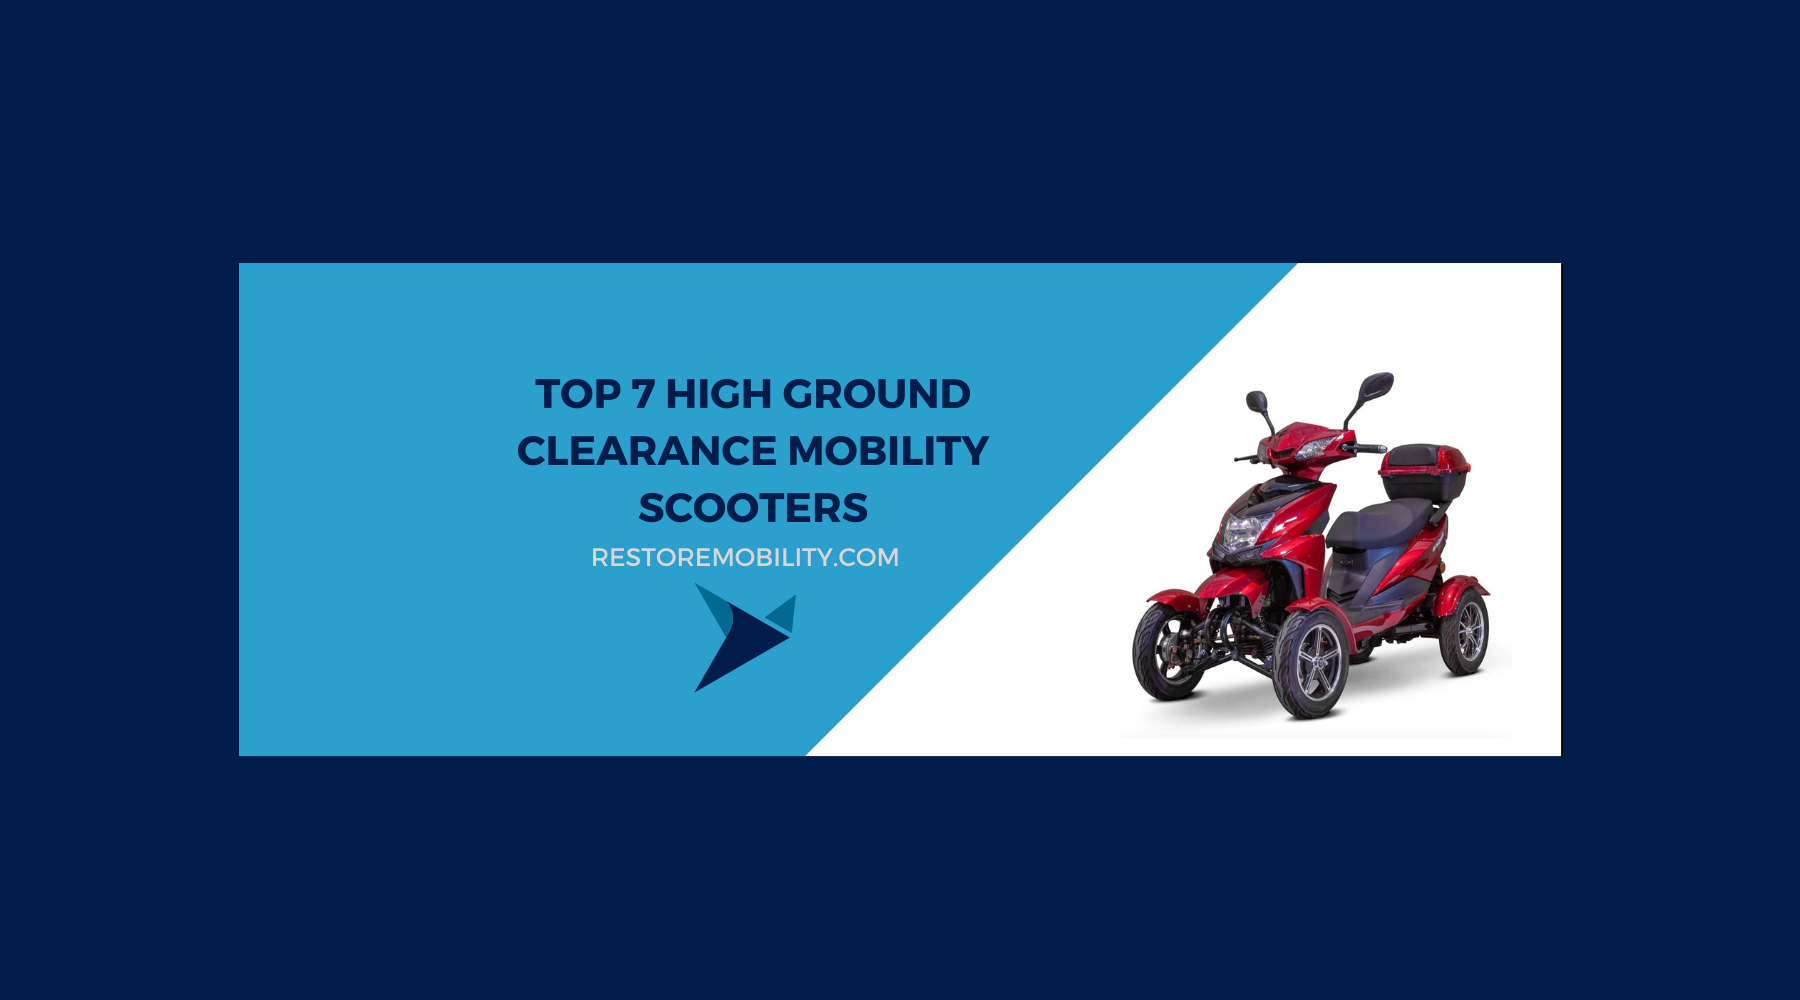 The Top 7 High Ground Clearance Mobility Scooters